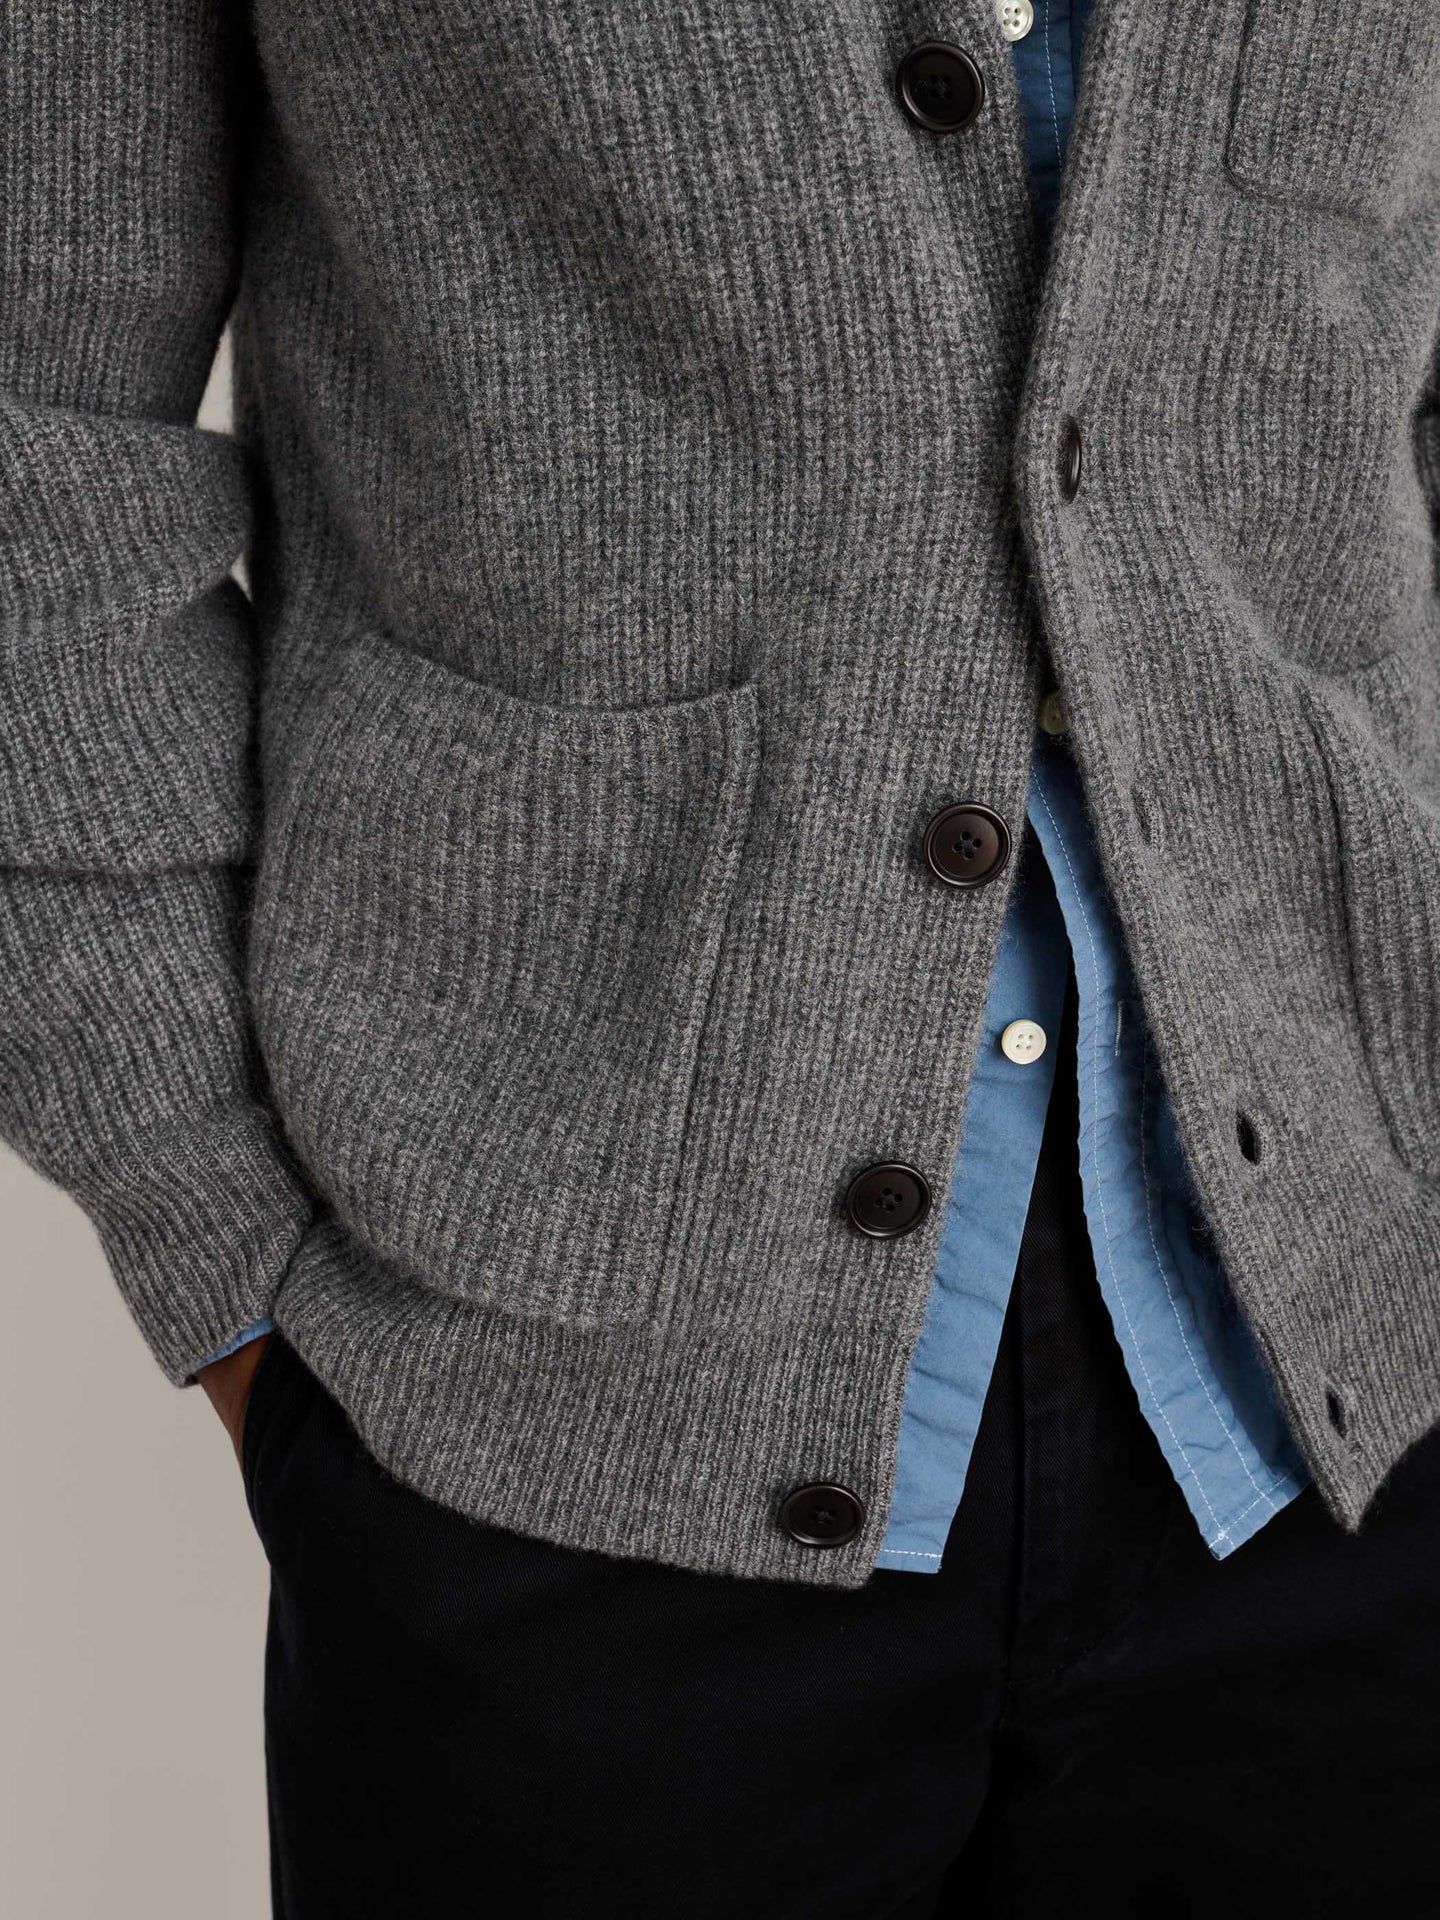 Ribbed Cardigan in Cashmere Heather Pewter